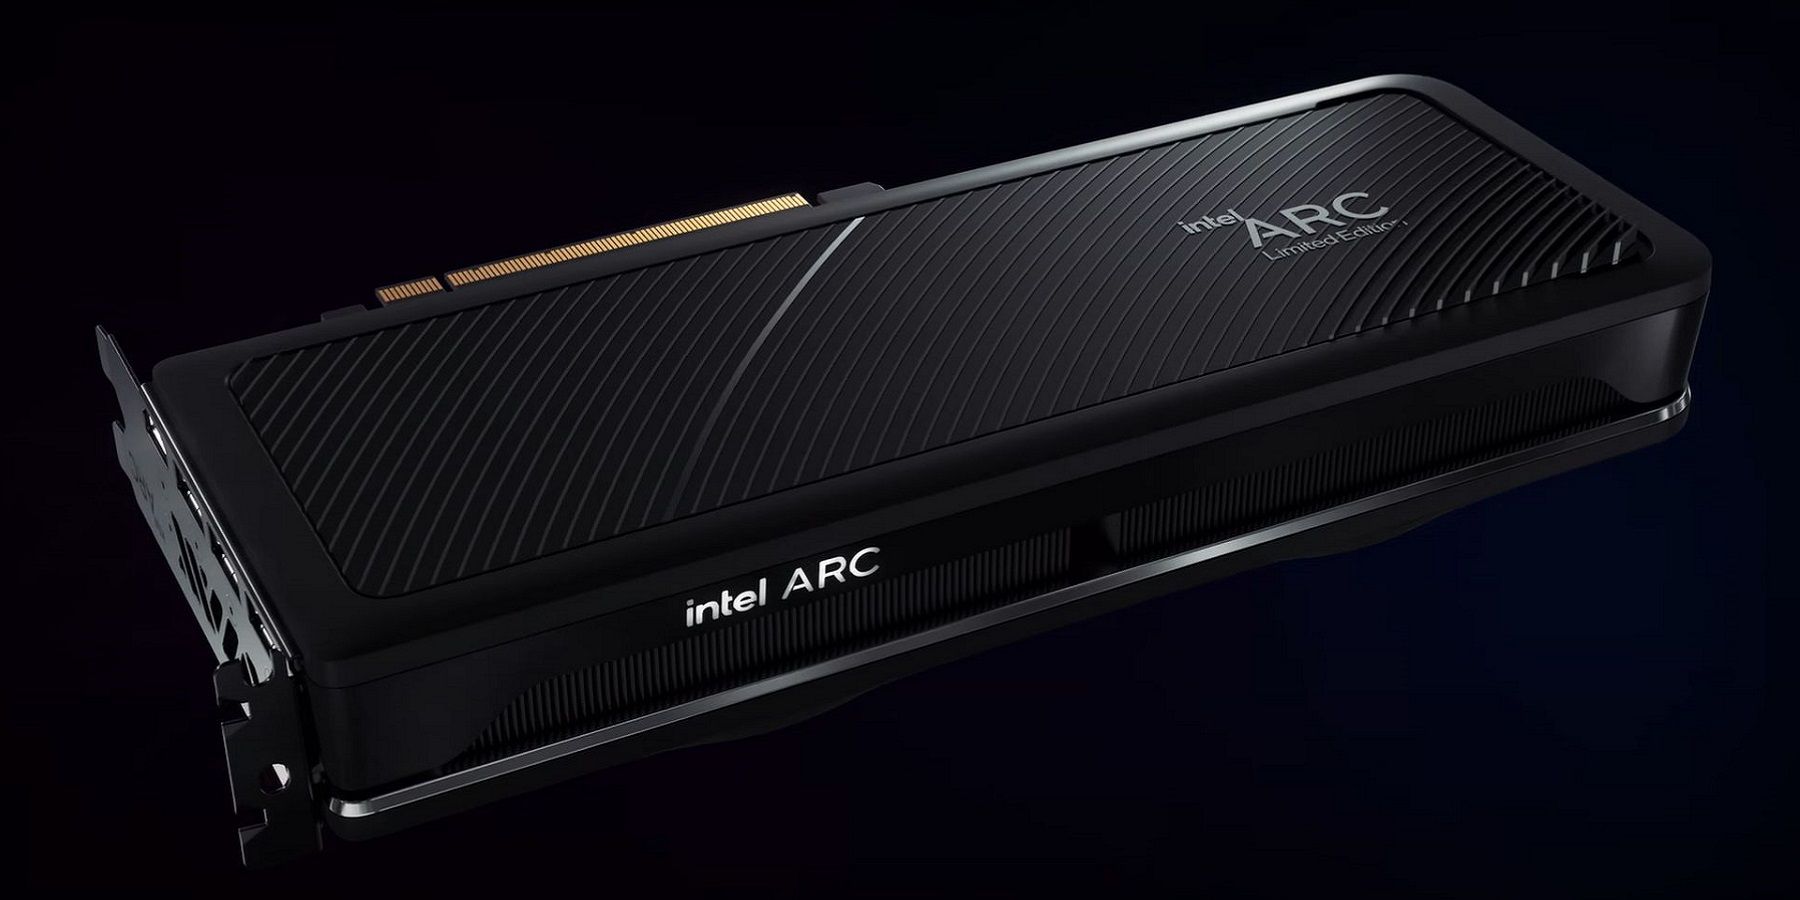 Image of an Intel Arc A770 graphics card on a black background.